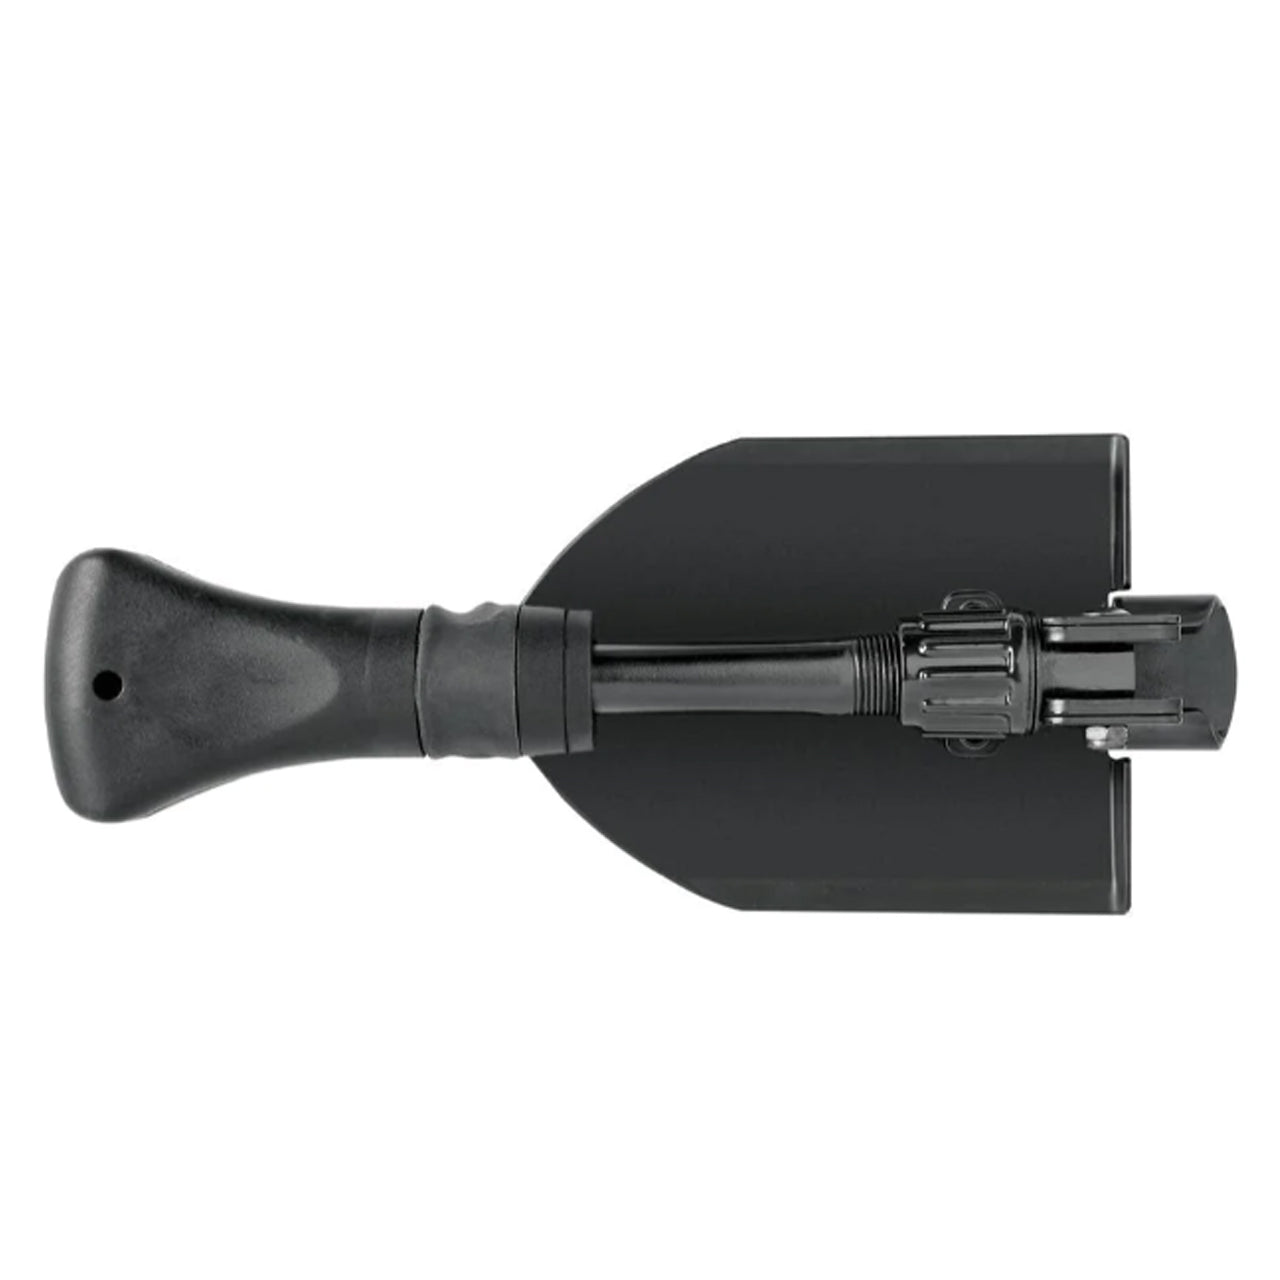 This lightweight, foldable shovel is ideal to bring along on back-country trips. A glass-filled nylon shaft and rubberized handle secure the grip for digging or hammering. Use as a spade or fold back to reveal a hammer for pounding, easily fold away with the push of a button. www.defenceqstore.com.au